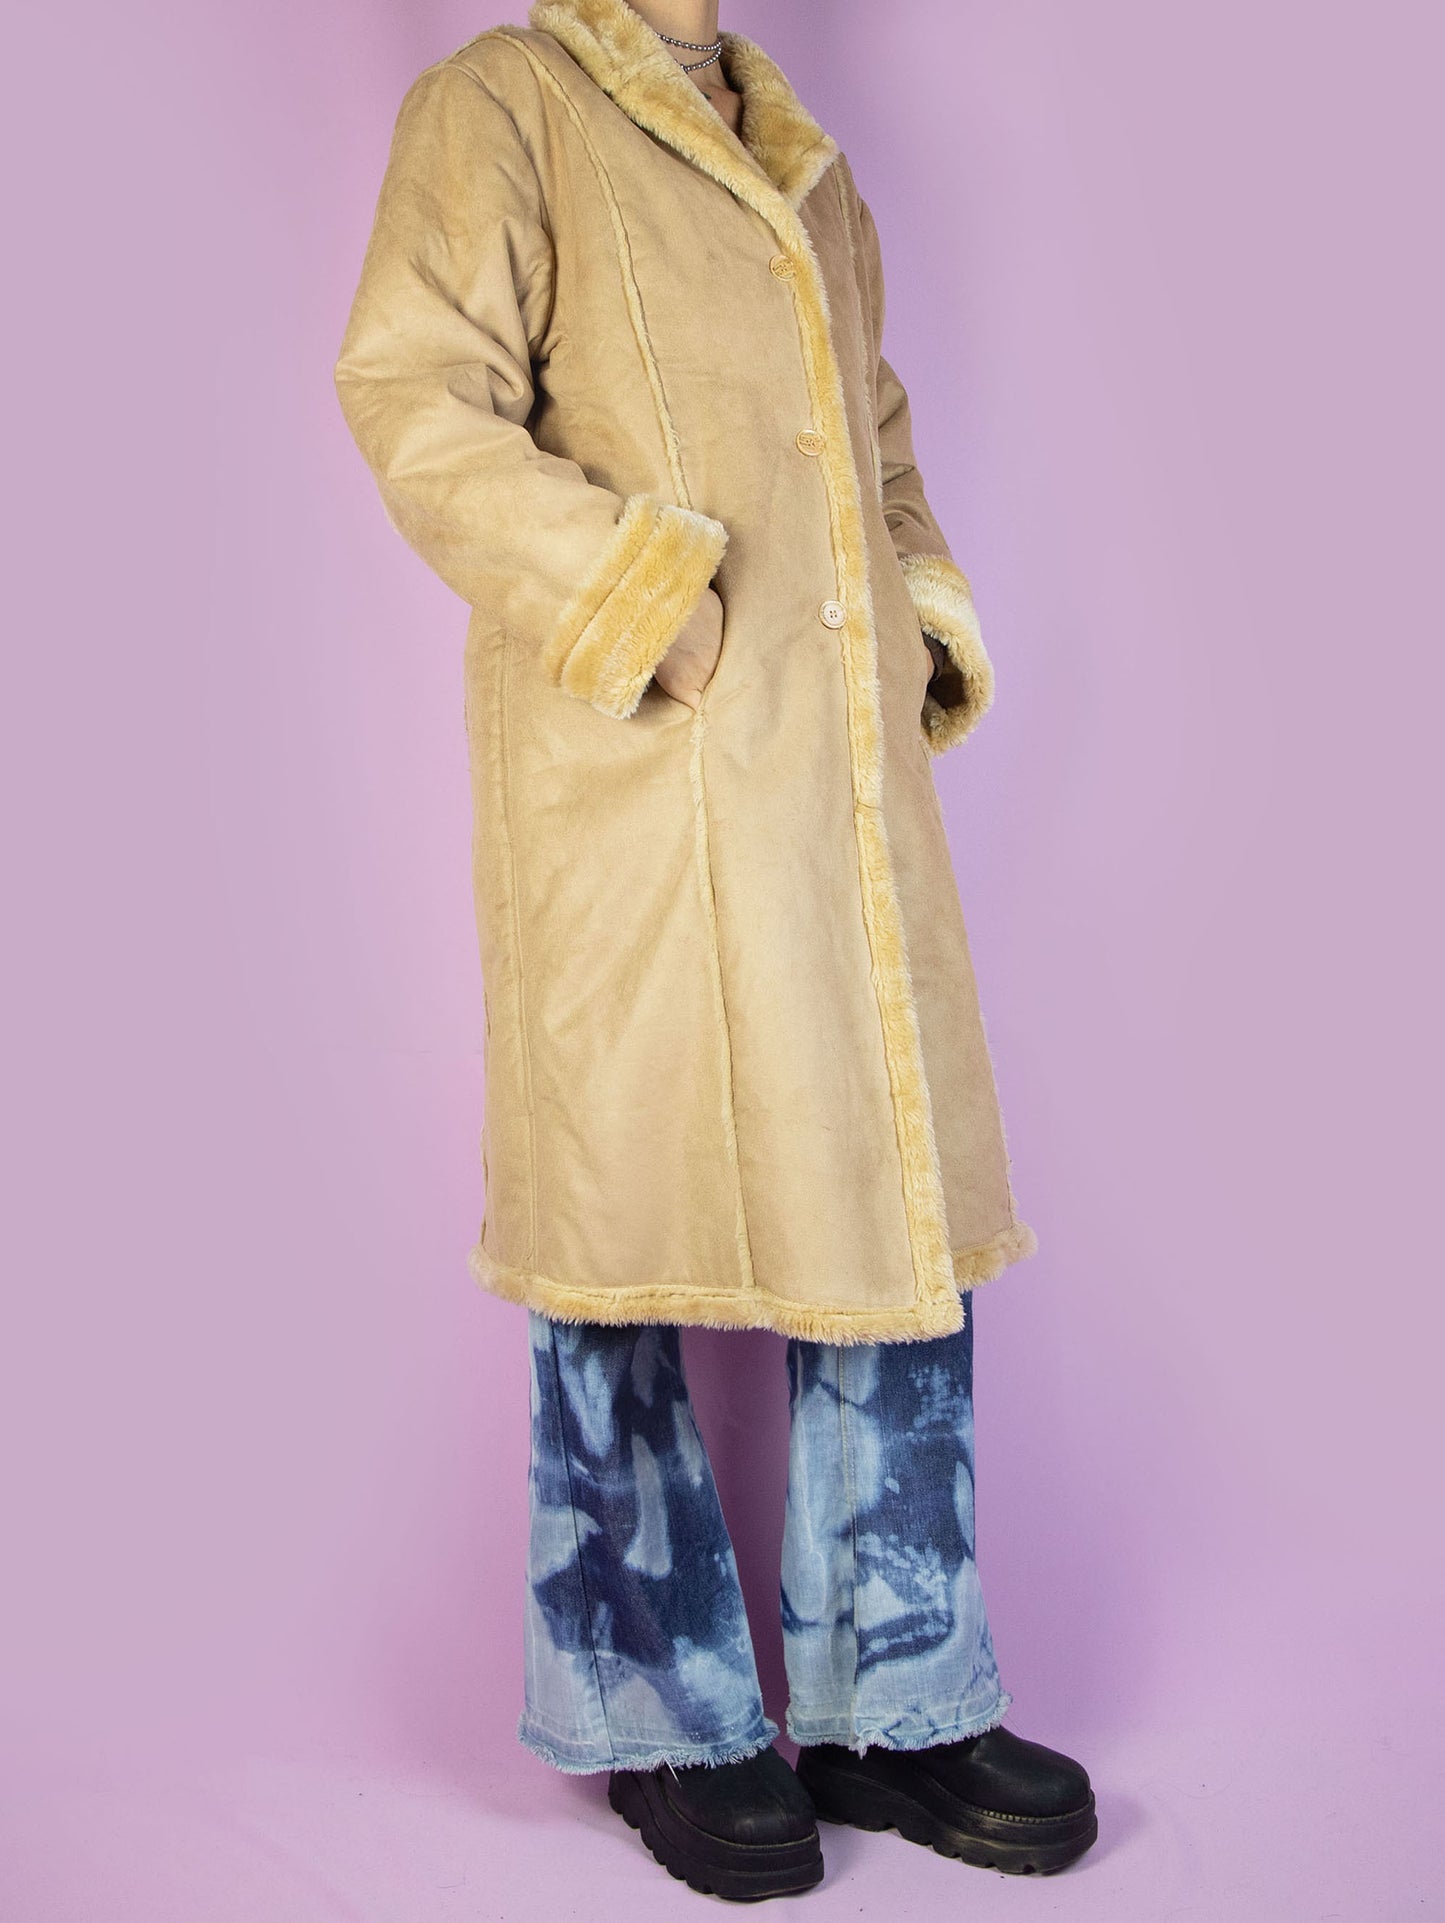 The Y2K Winter Suede Maxi Coat is a vintage 2000s light beige-brown faux suede long statement jacket with faux fur interior, collar, cuffs, pockets, and buttons.